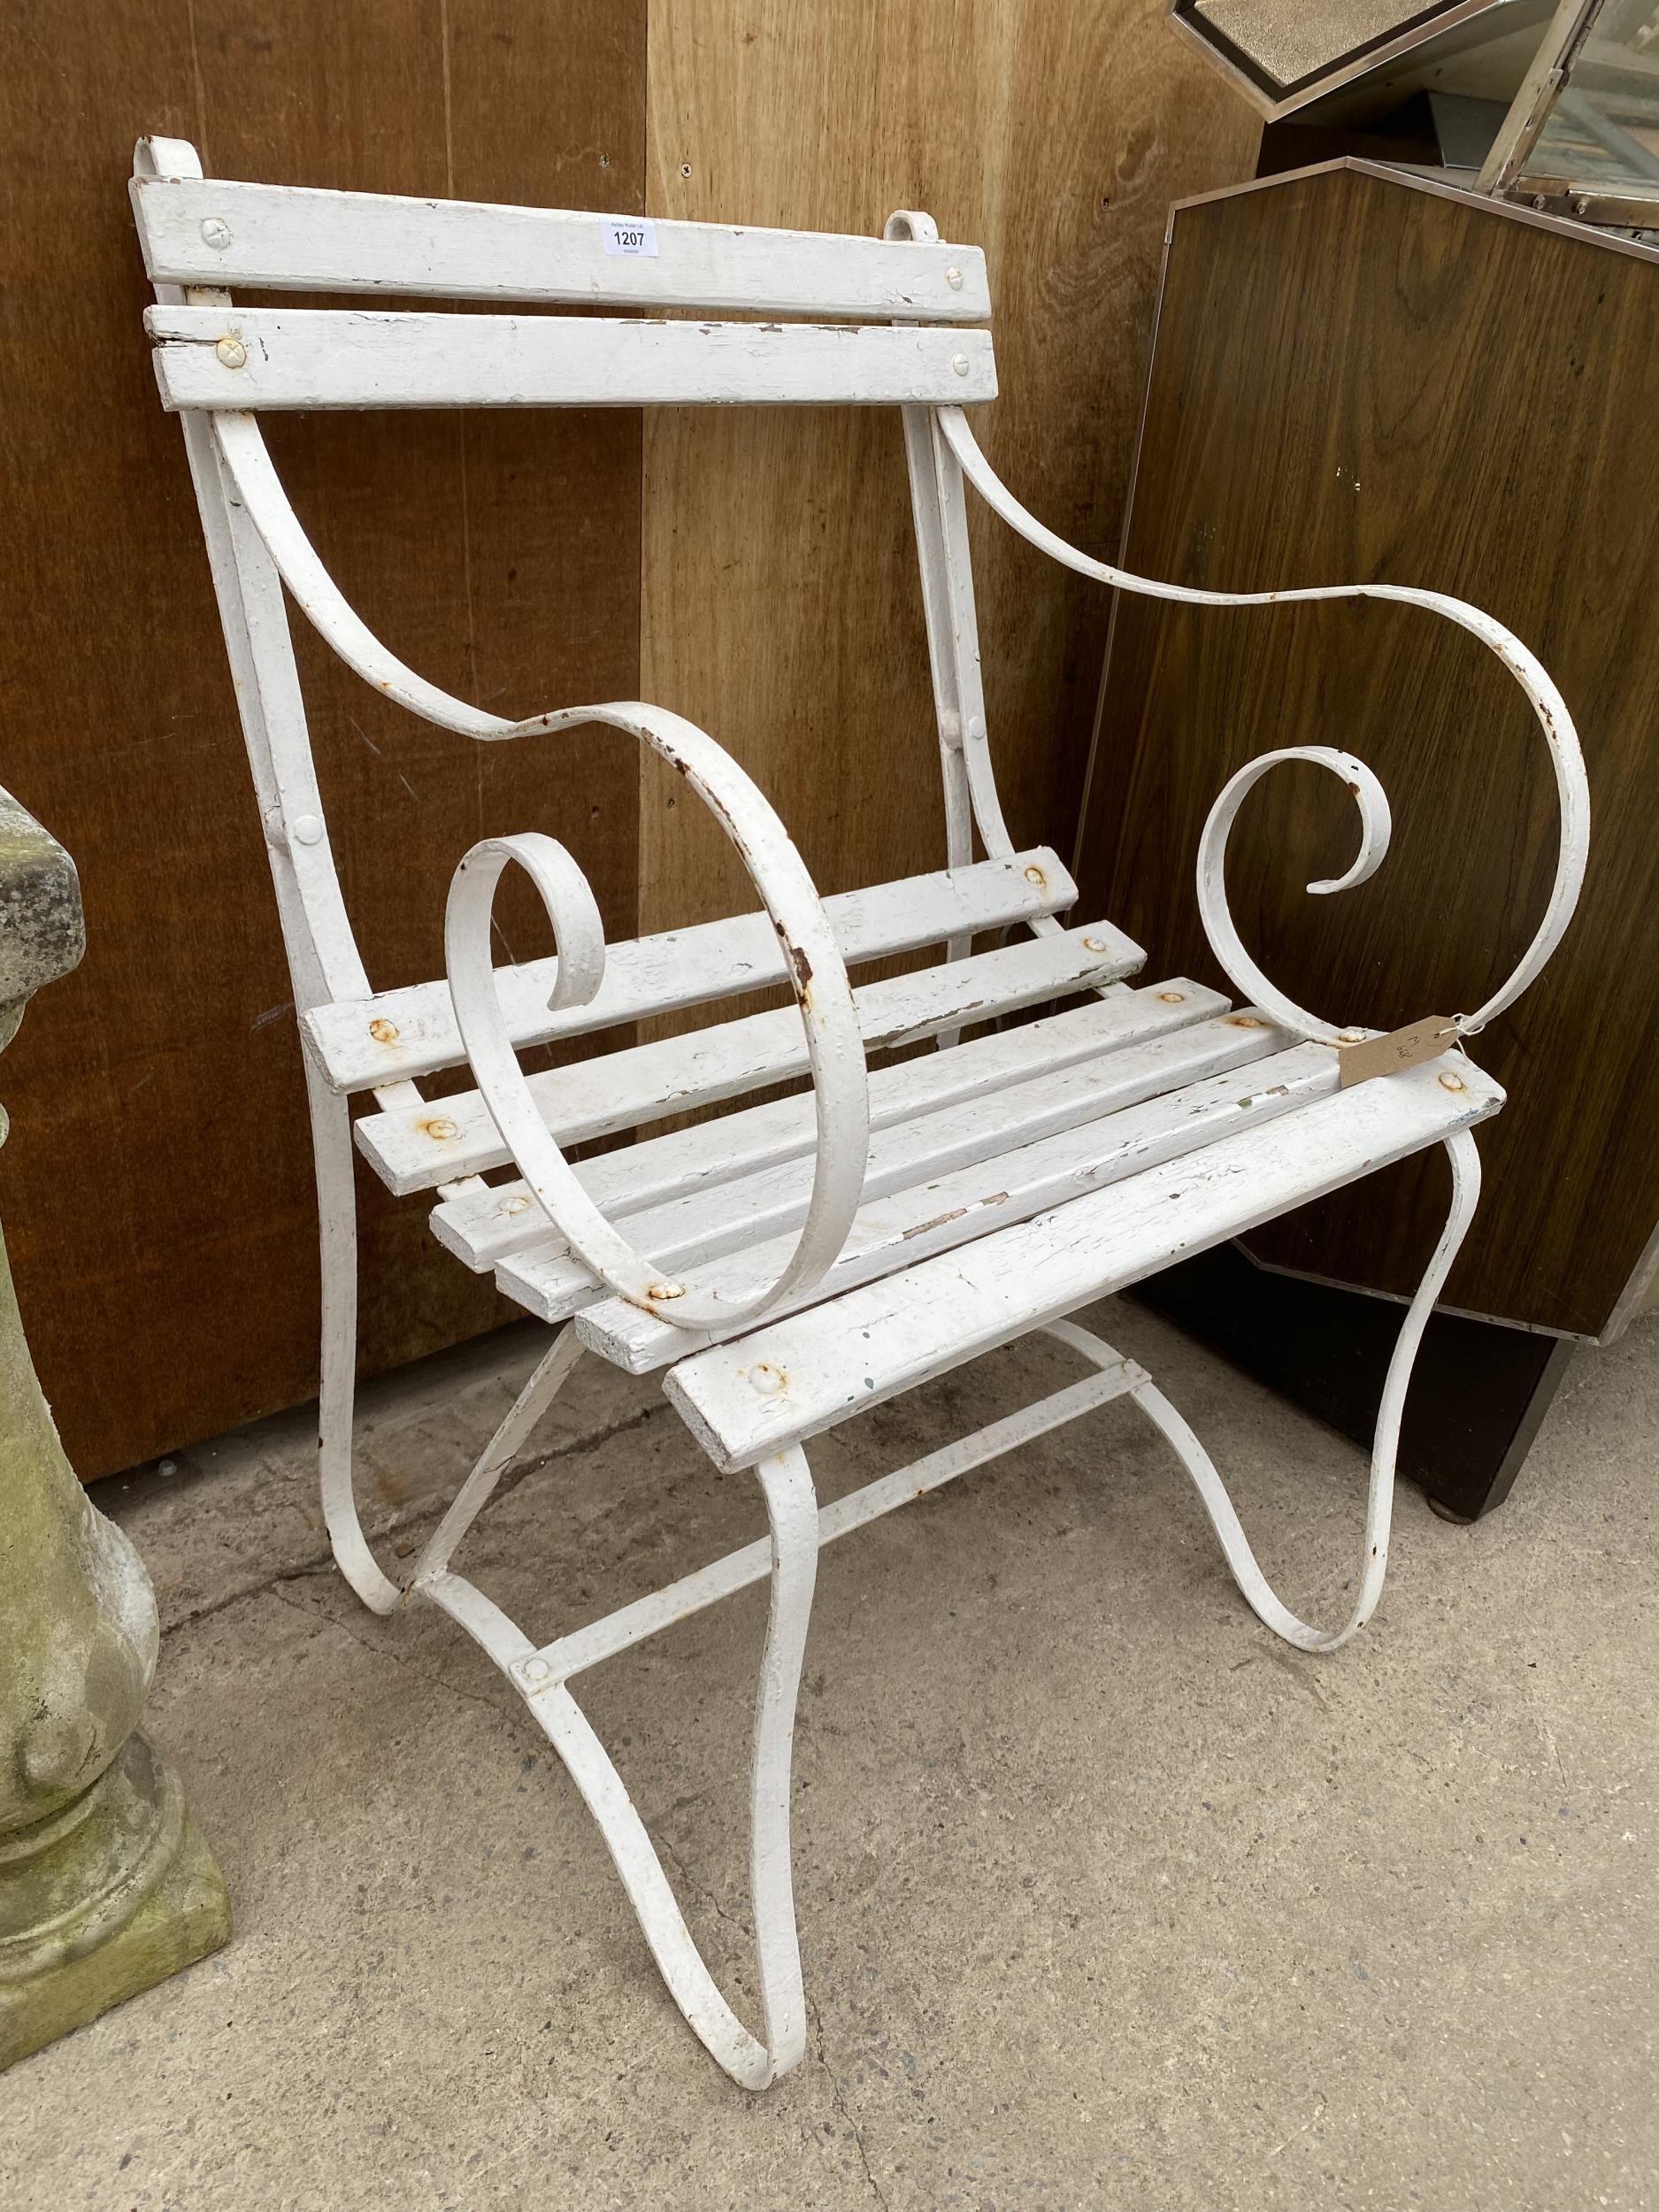 A VINTAGE ARM CHAIR WITH WROUGHT IRON ENDS AND SLATTED SEAT AND BACK - Image 2 of 2